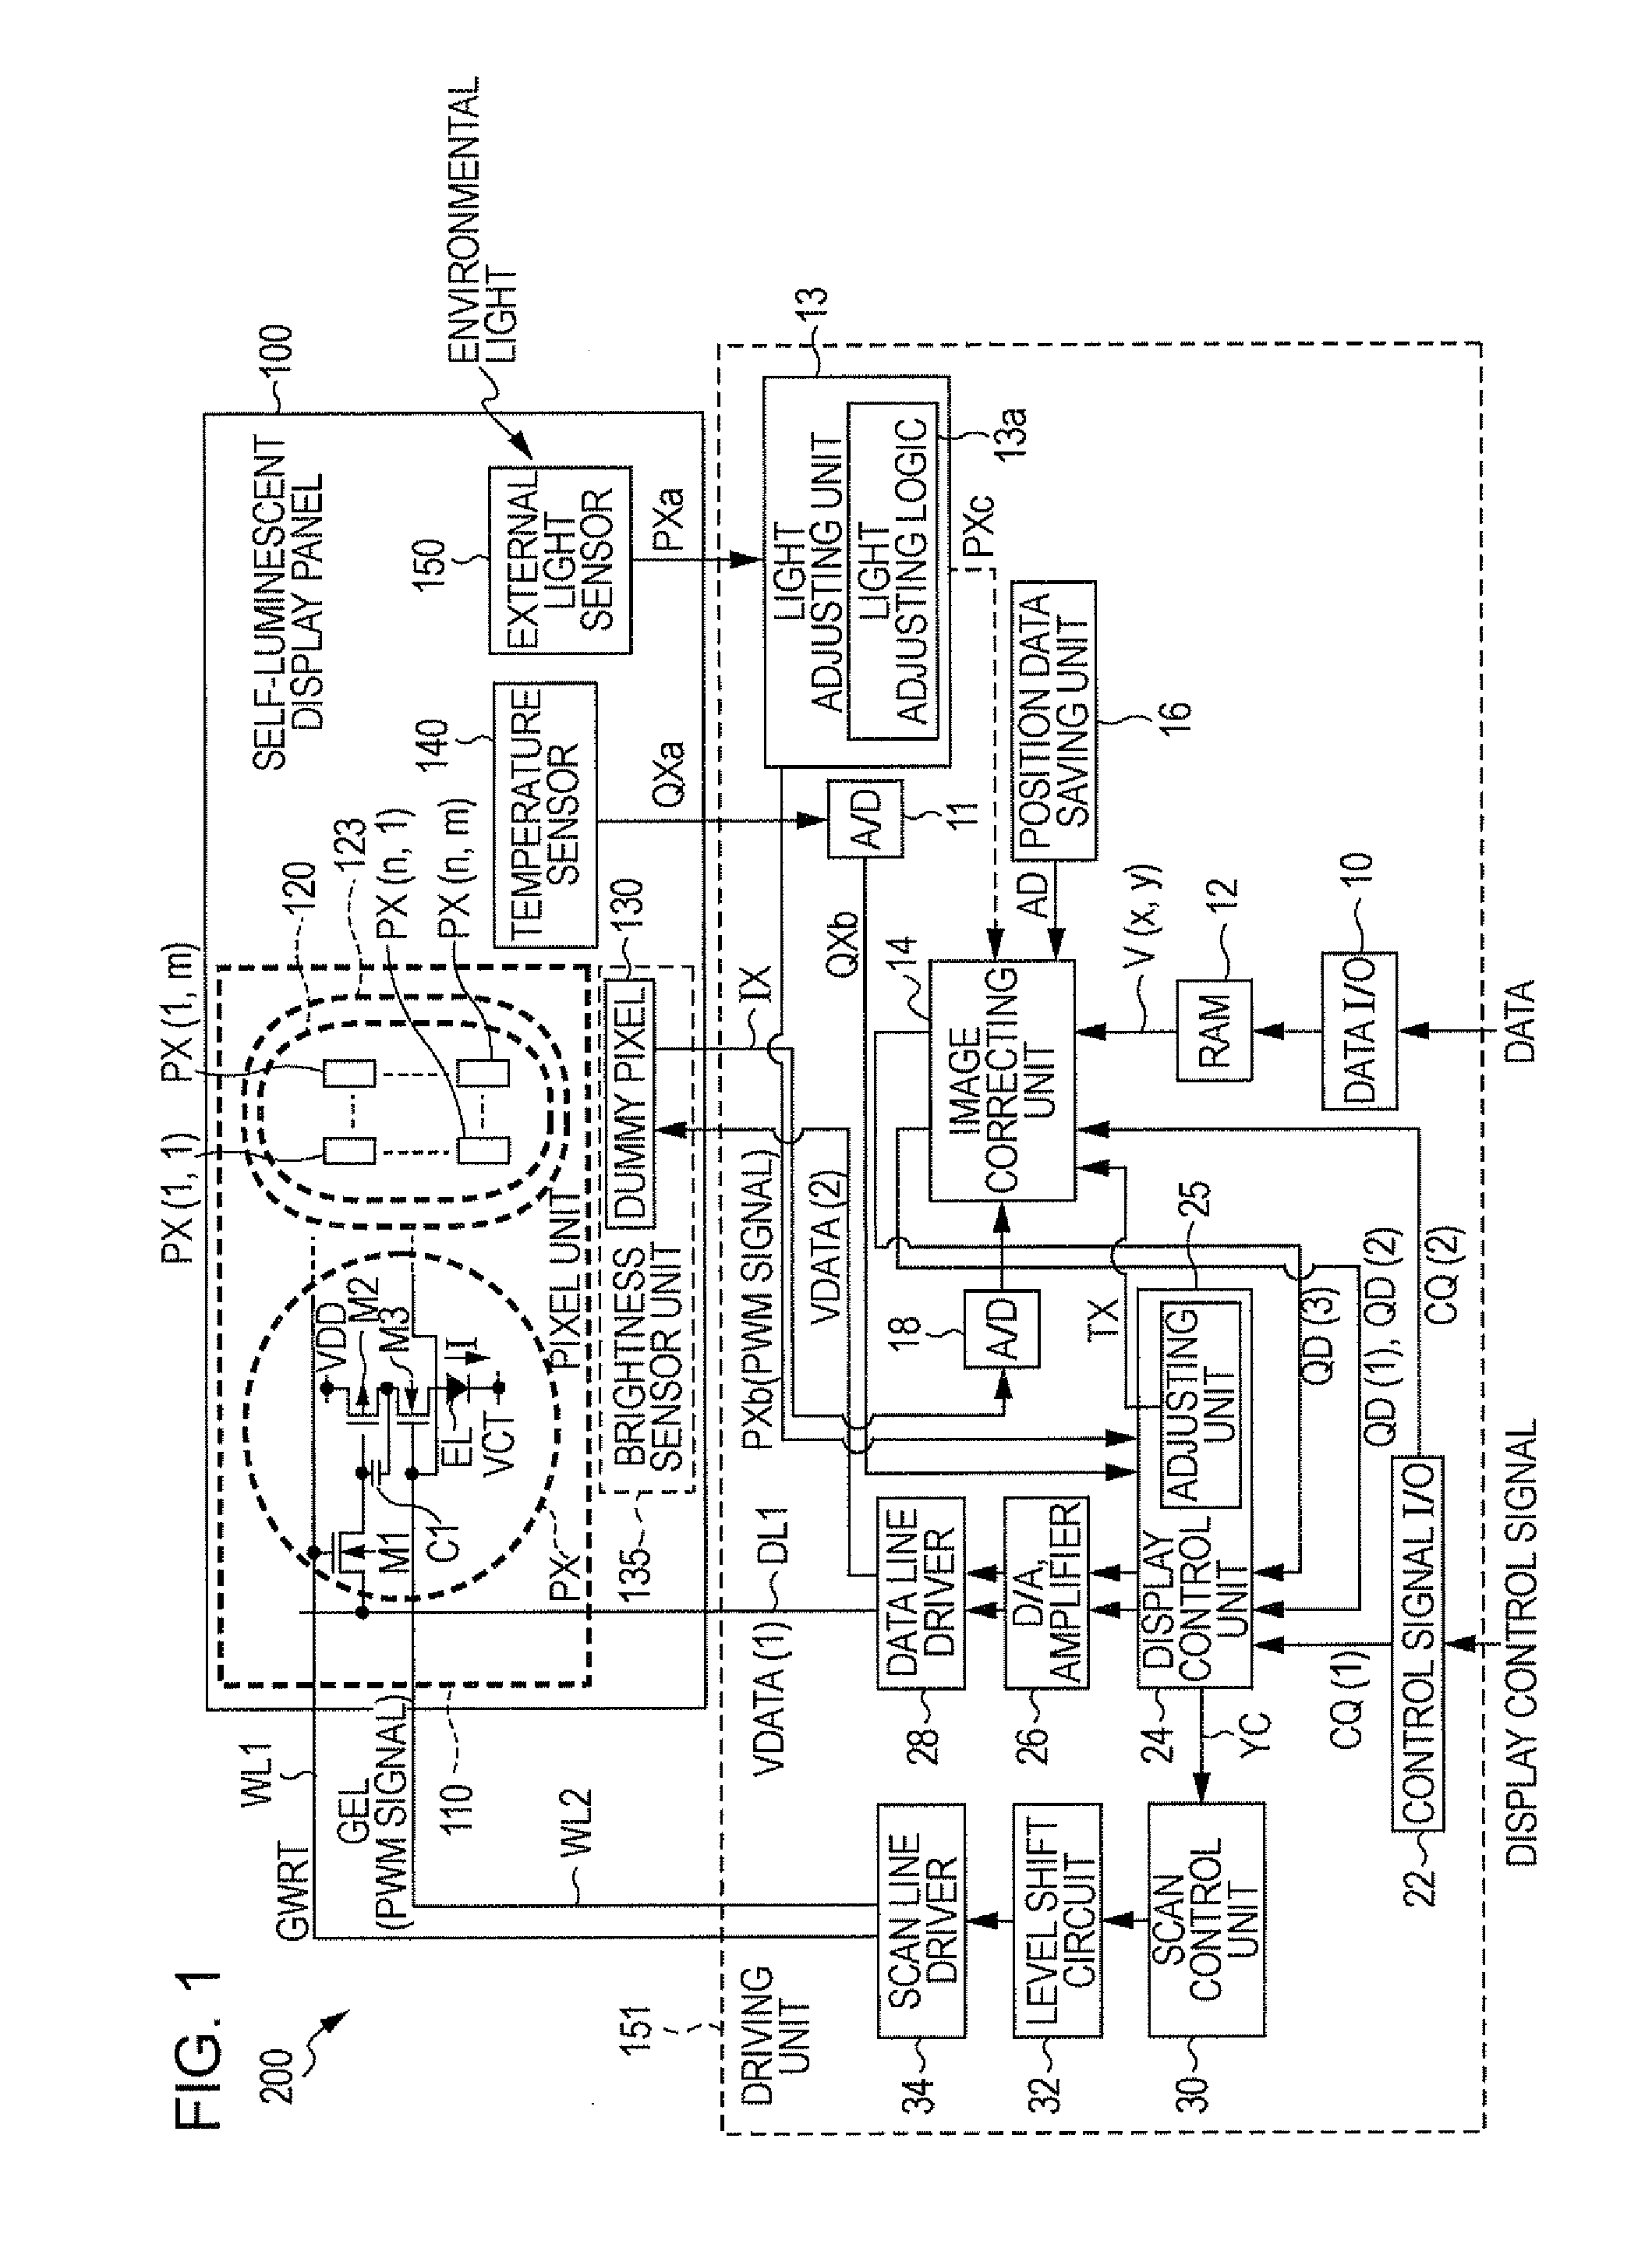 Self-luminescent display device and electronic apparatus